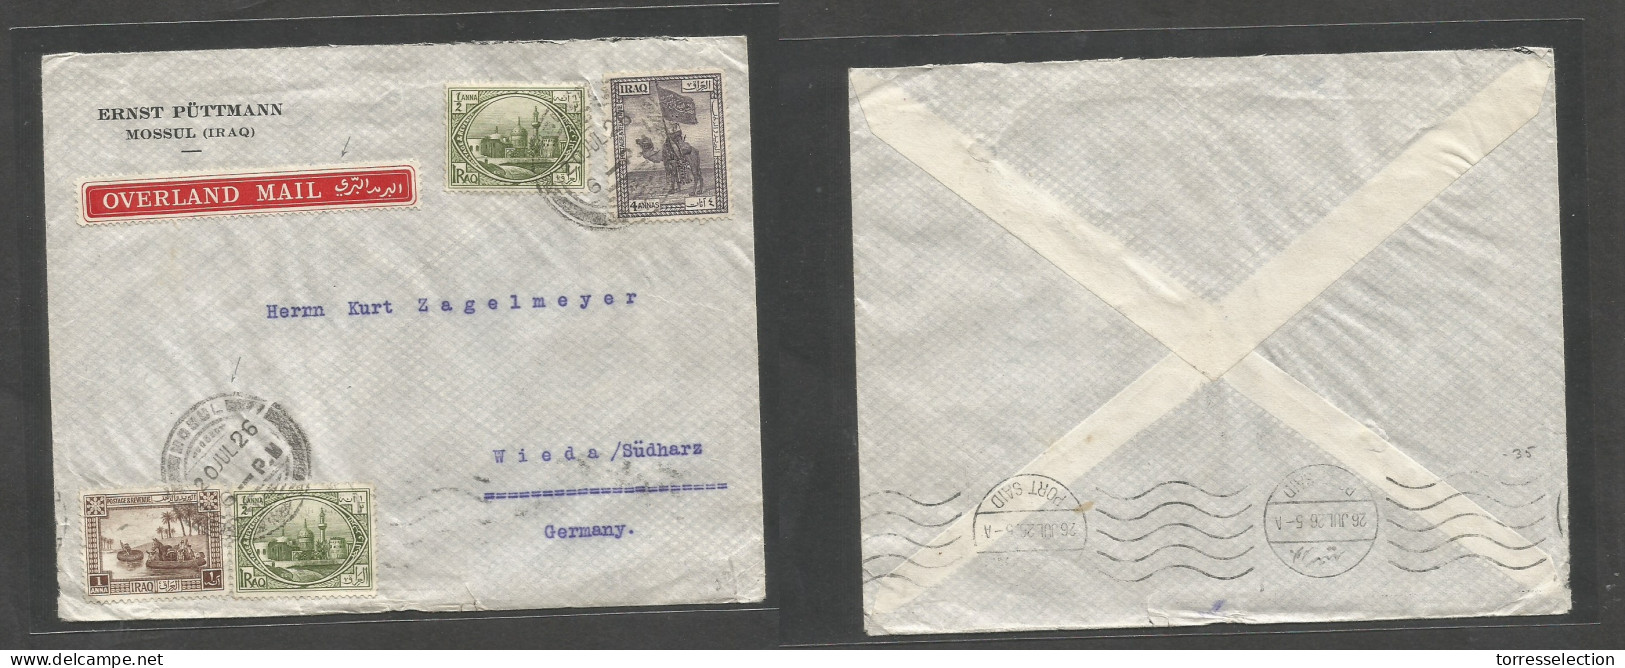 IRAQ. 1926 (20 July) Mosul - Germany, Wieda. Multifkd Env Via Port Said (26 July) With Red Label "OVERLAND MAIL" Tied Cd - Irak